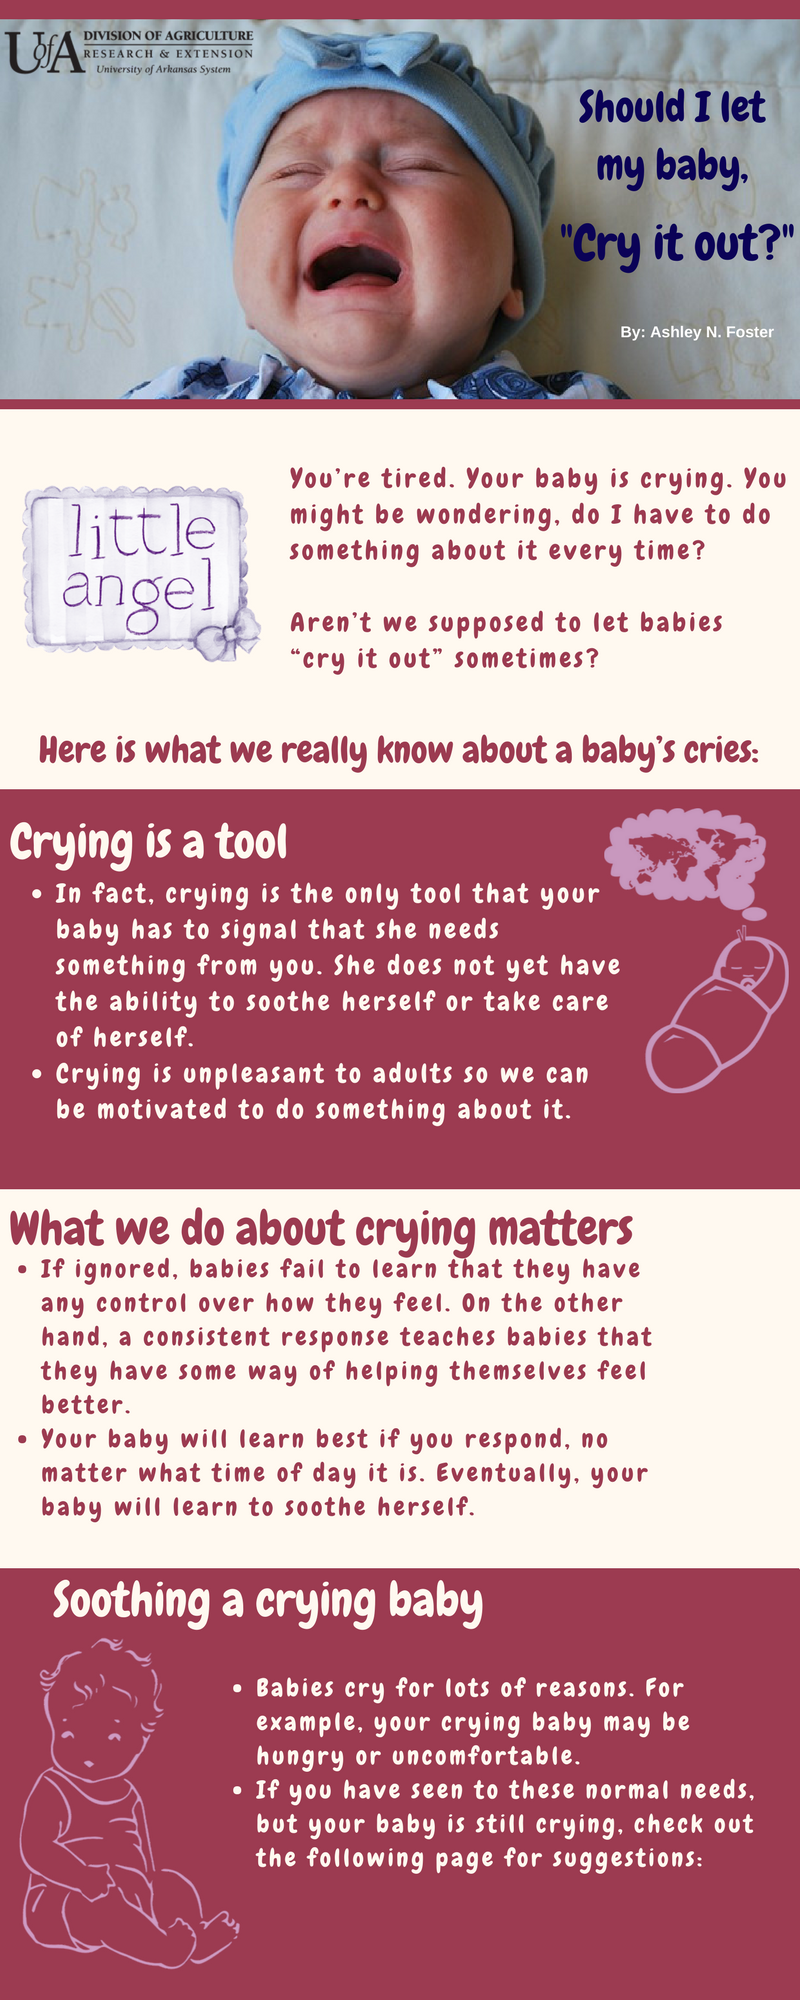 Cry it out infographic Part 2